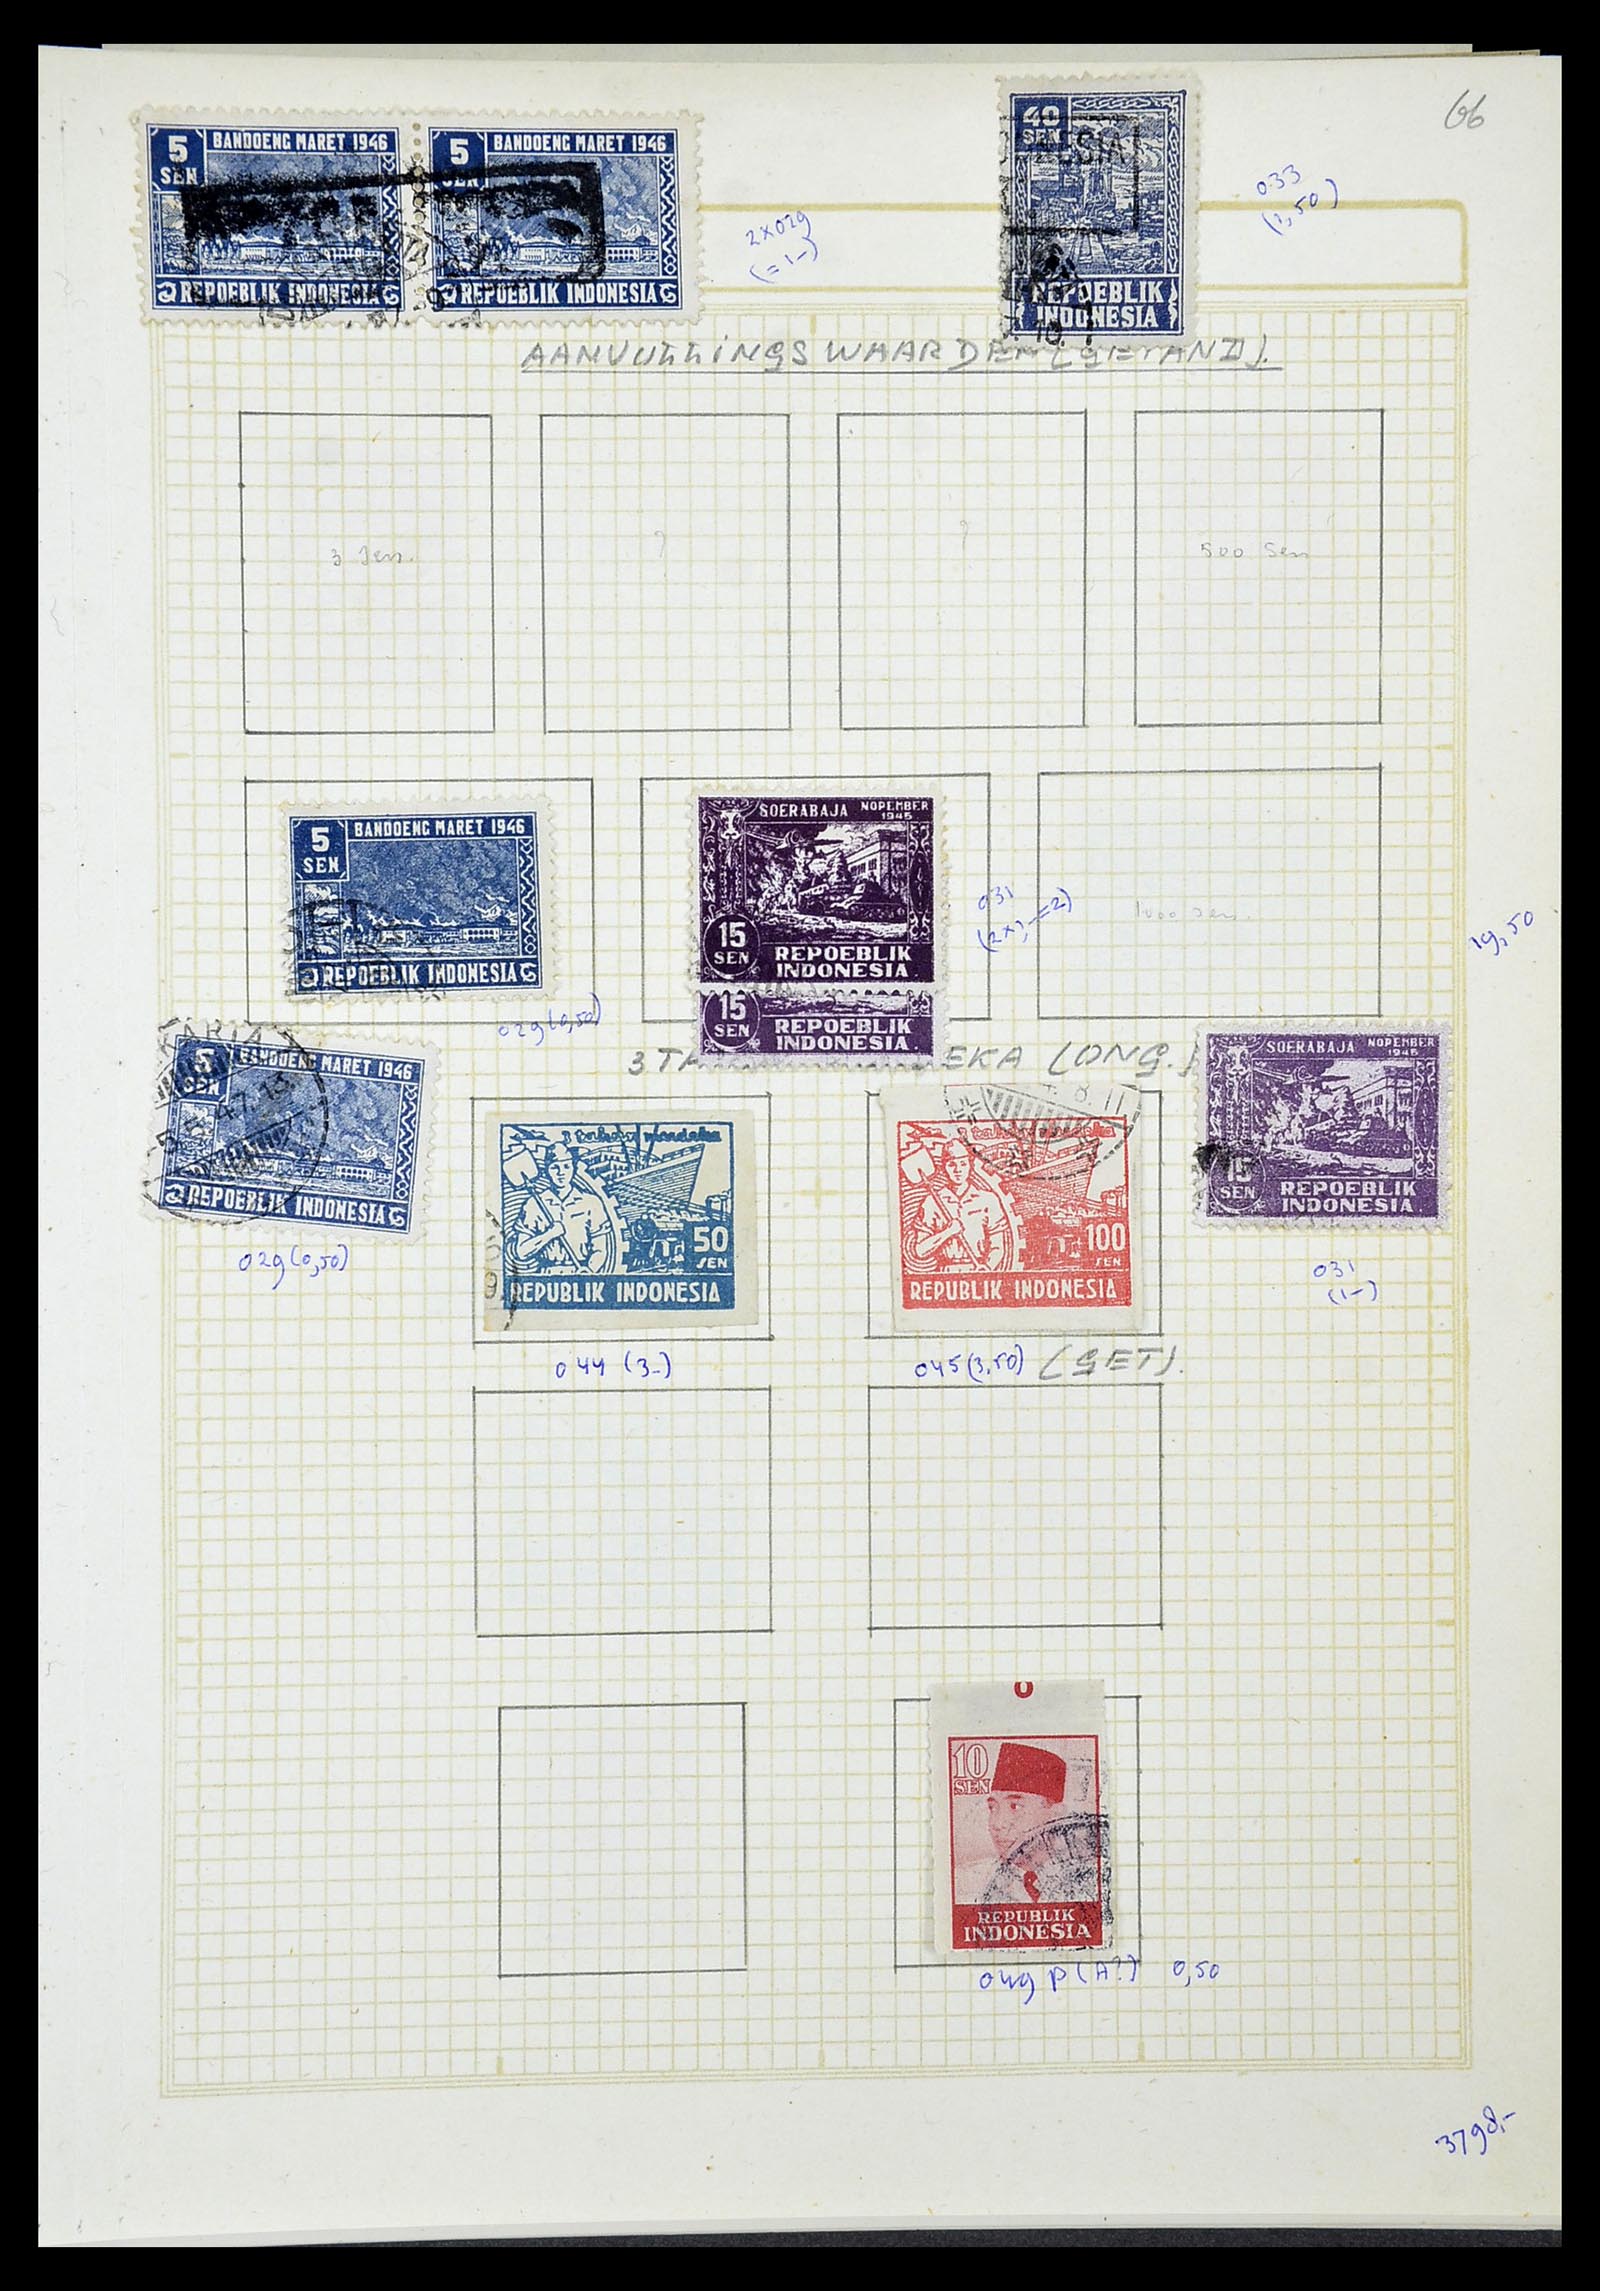 34545 167 - Stamp Collection 34545 Japanese Occupation of the Dutch East Indies and 